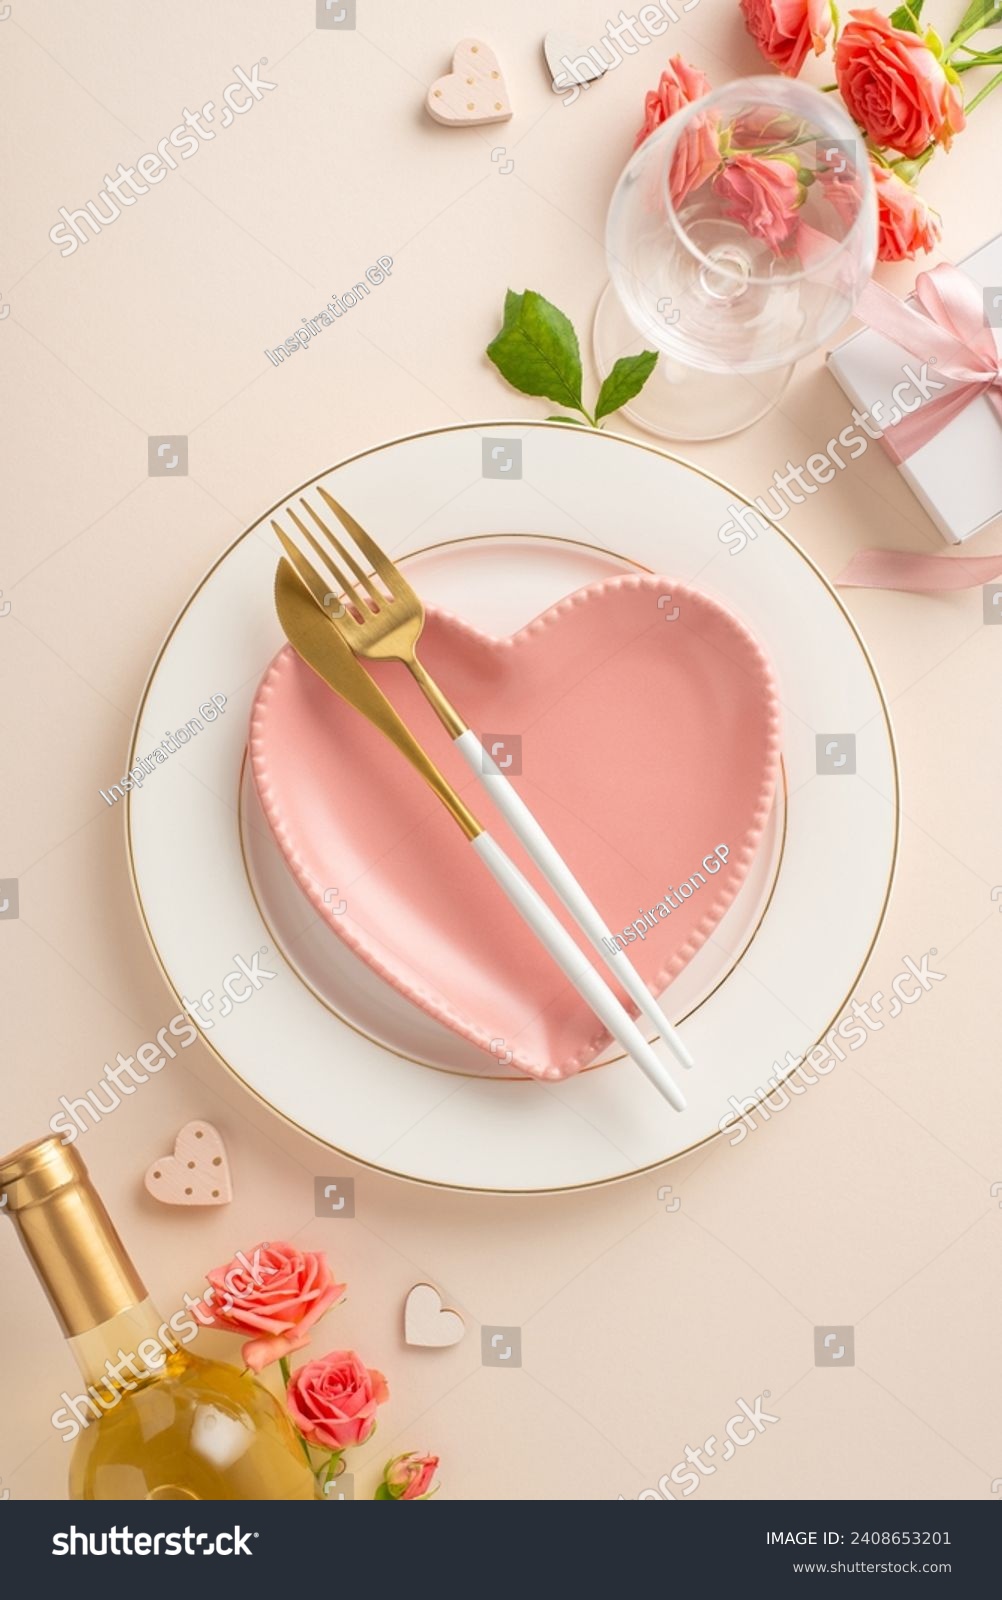 Elegant Date Night: vertical top-down view captures the essence of a romantic dinner setting. Heart-shaped plate, cutlery, white wine, roses, themed decor on pastel beige surface for heartfelt message #2408653201